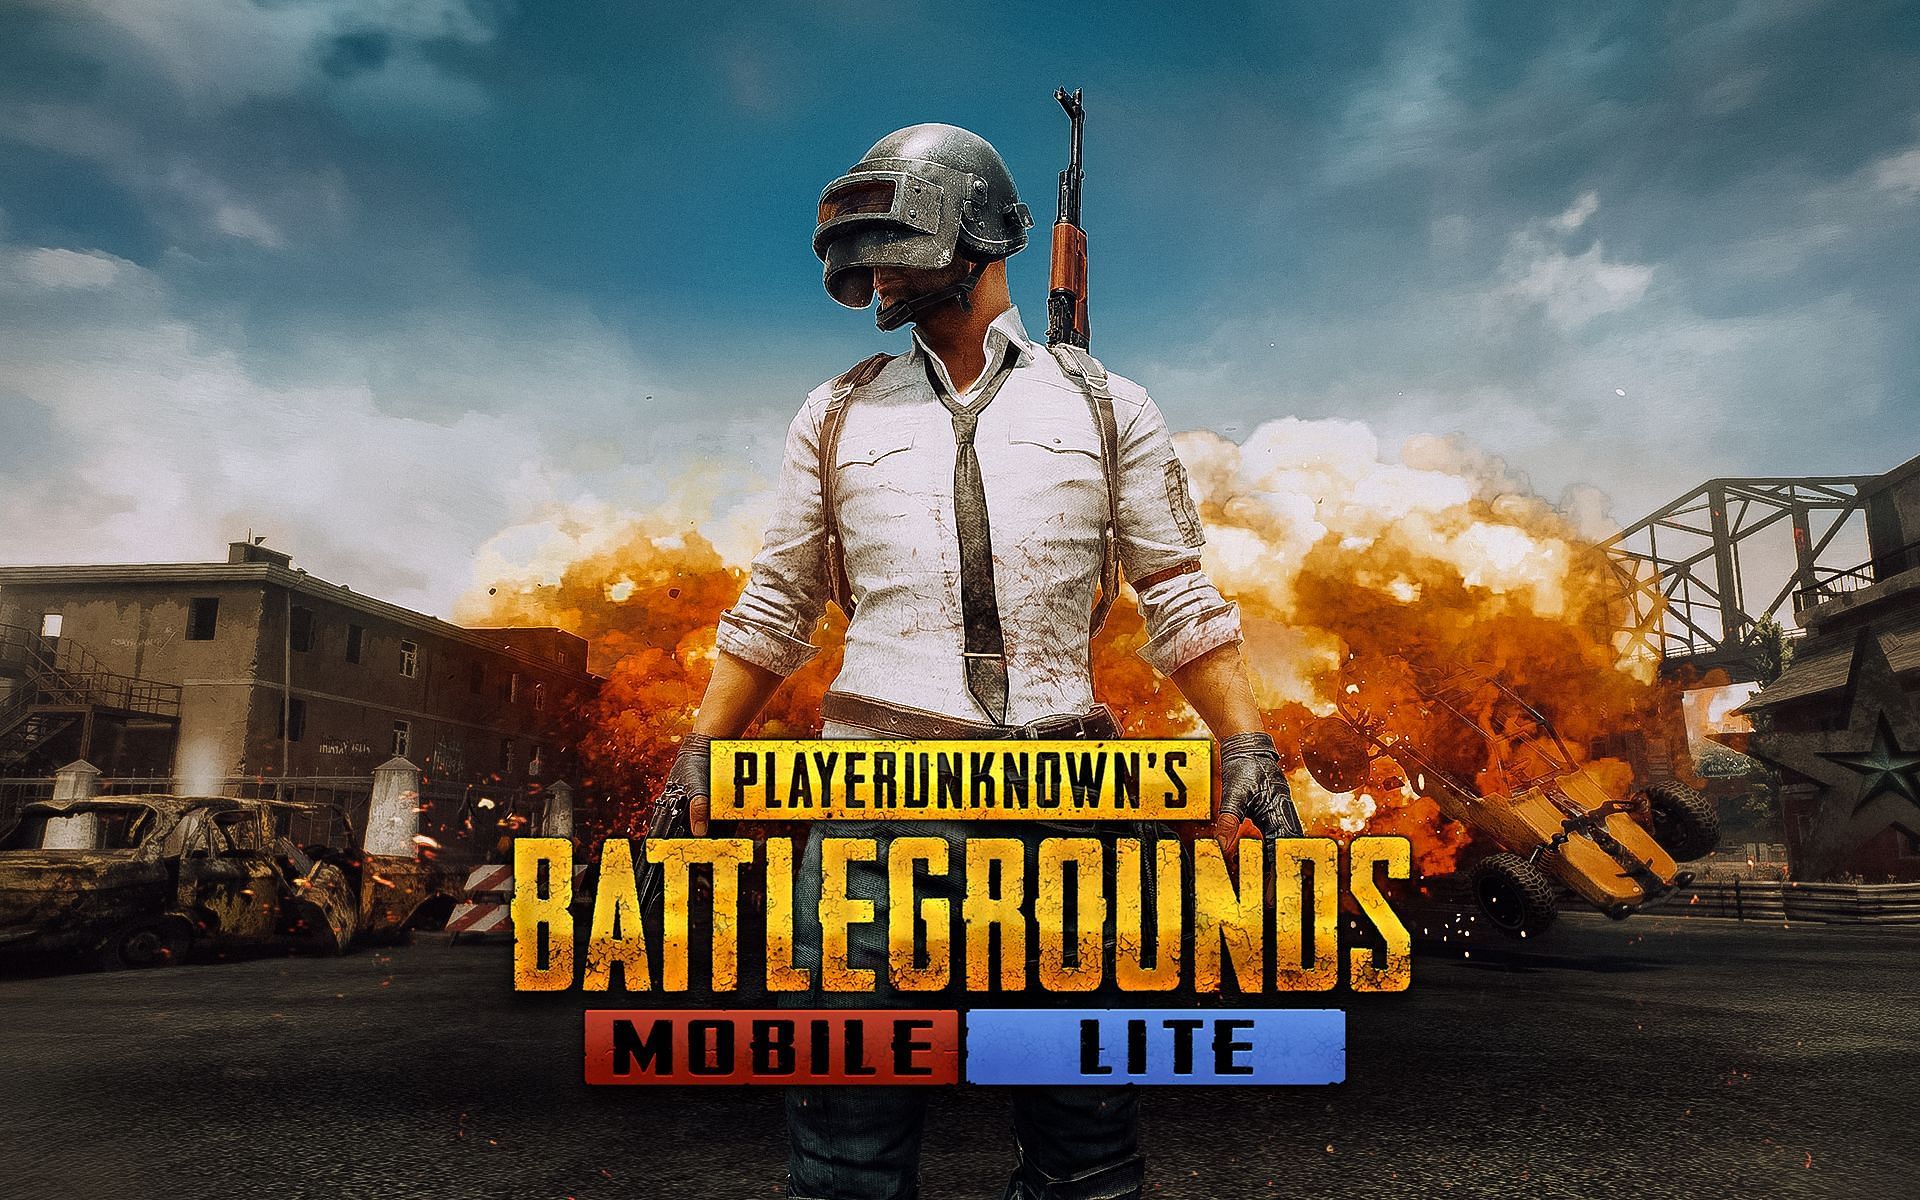 Users have the option to download the game using an APK file (Image via PUBG Mobile Lite)